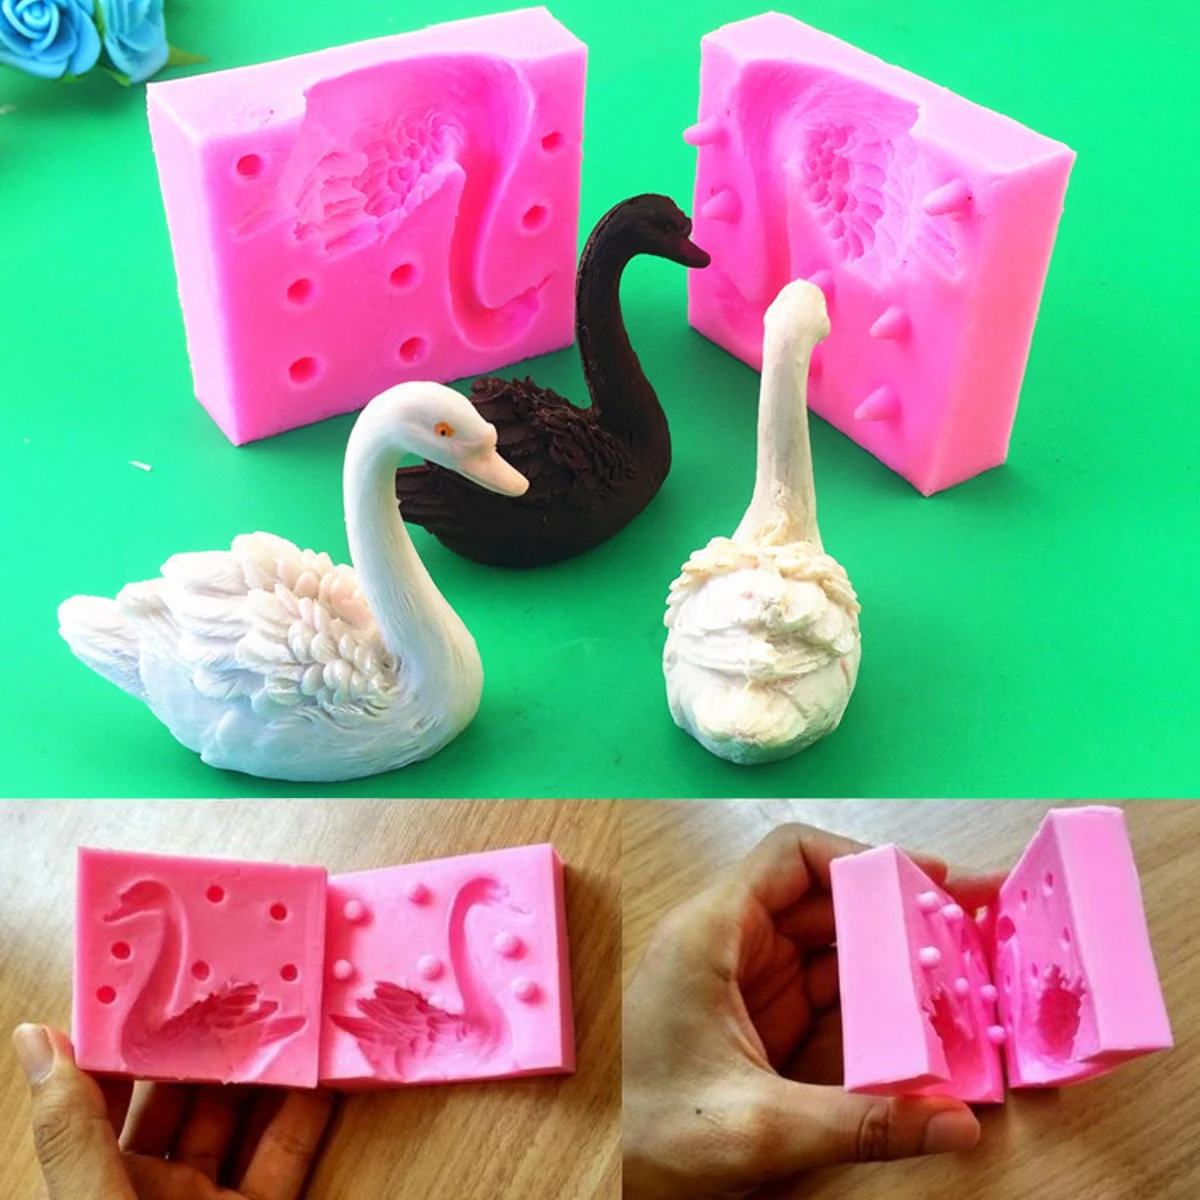 

Aomily Beautiful 3D Swan Fondant Silicone Mold Candle Sugar Craft Tool Chocolate Cake Mould Kitchen DIY Baking Decorating Tools